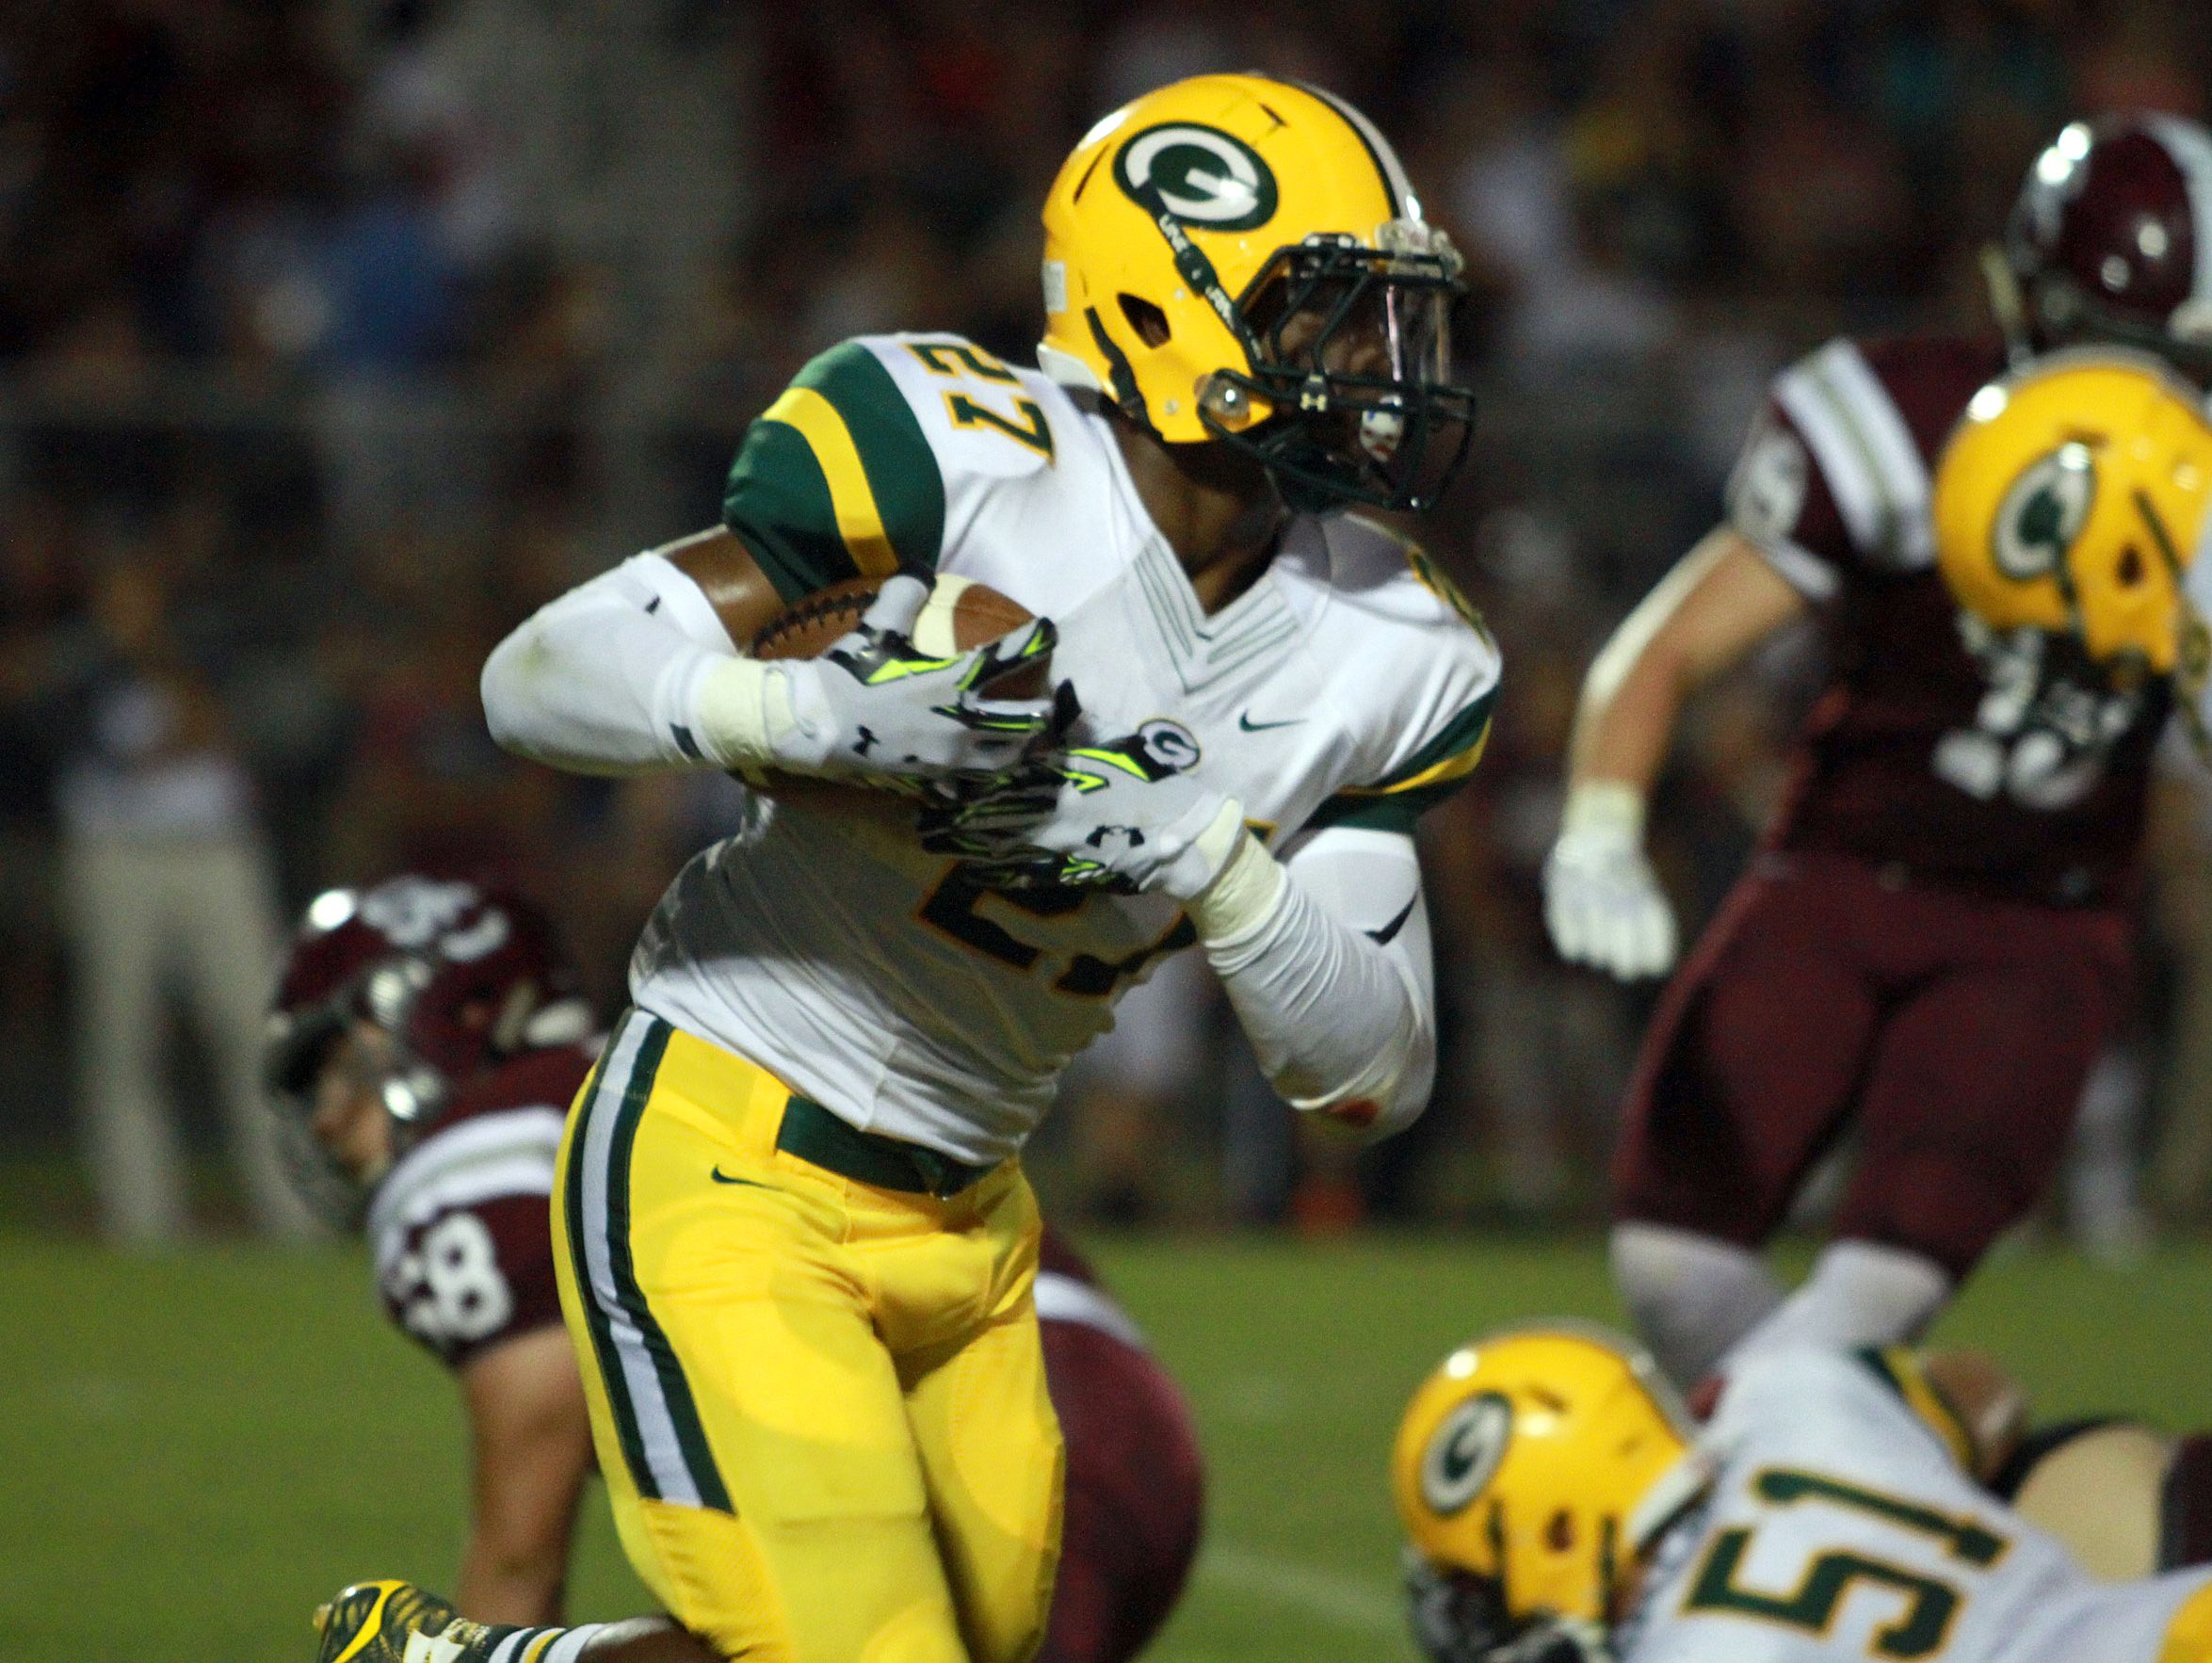 Gallatin running back Jordan Mason rushes against Station Camp during Friday's game. Mason rushed for 298 yards and three touchdowns on 40 carries in the Green Wave's 34-27 victory.